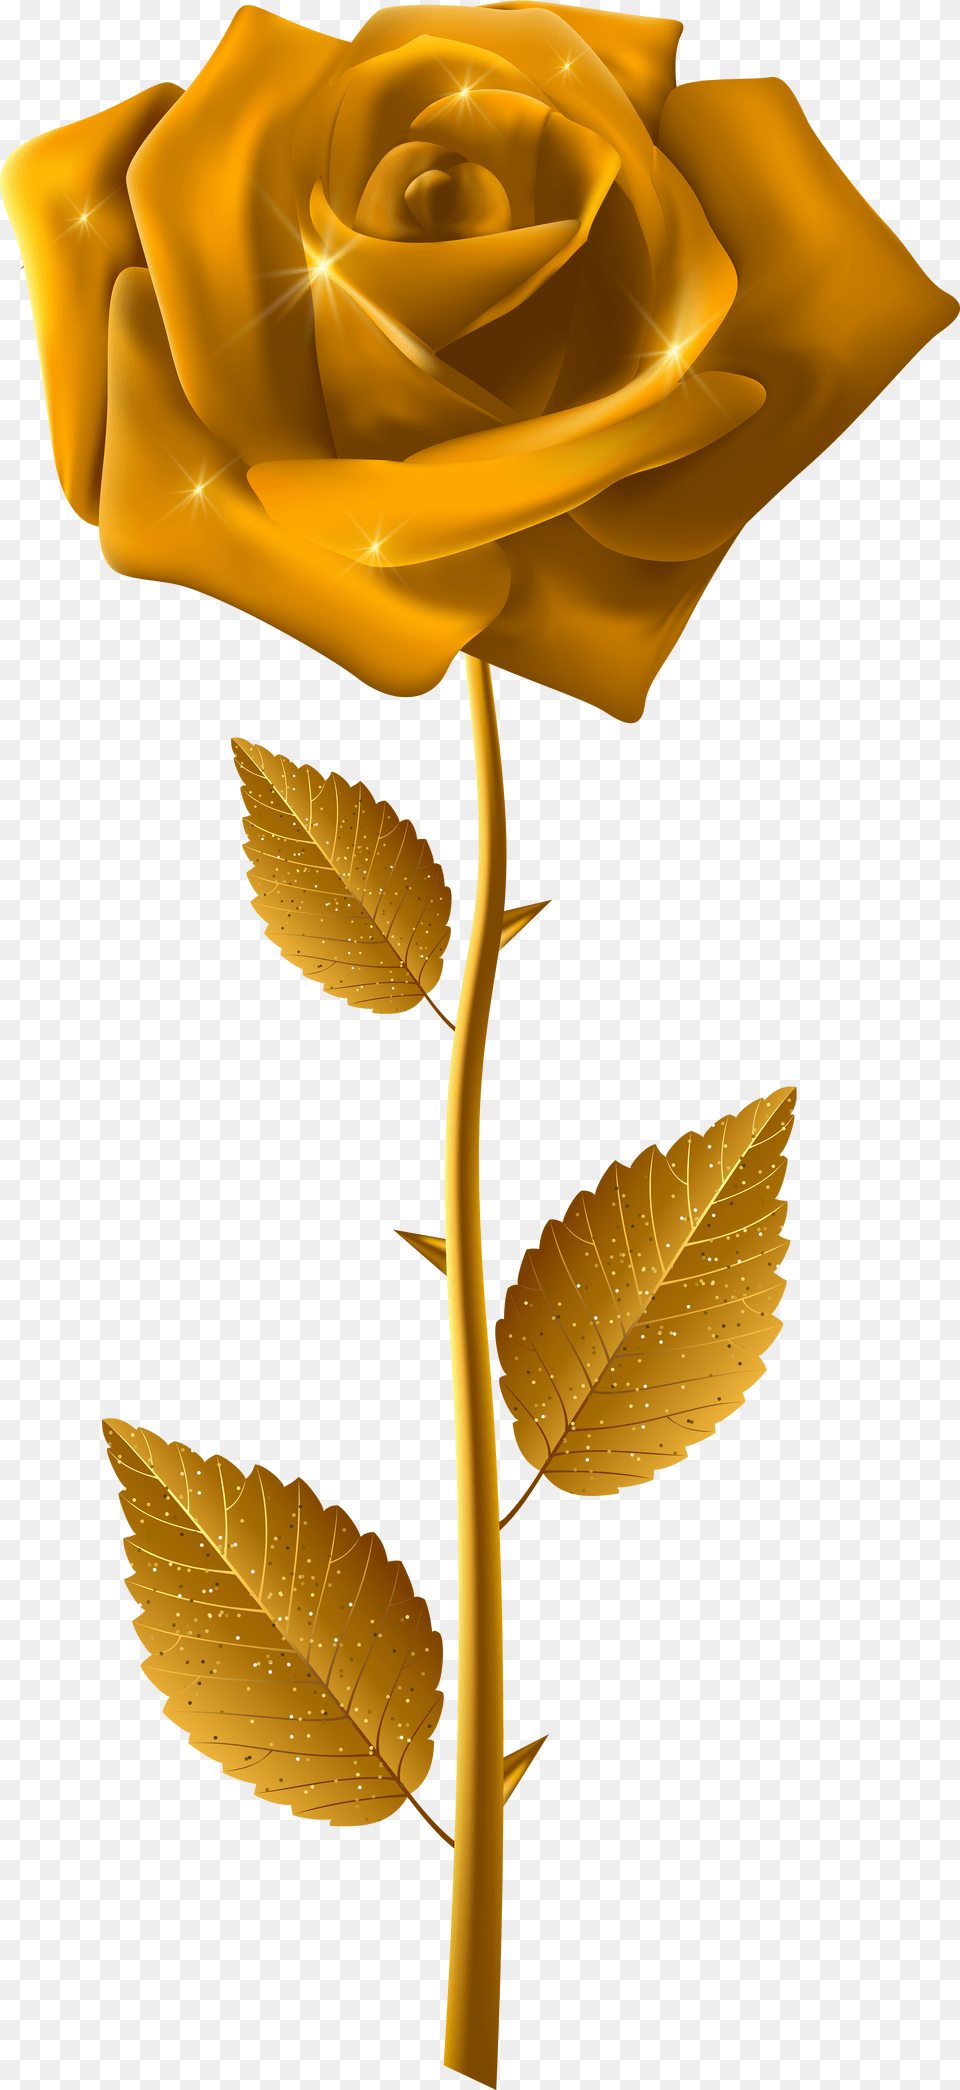 Gold Rose With Steam Image Portable Network Graphics Free Transparent Png